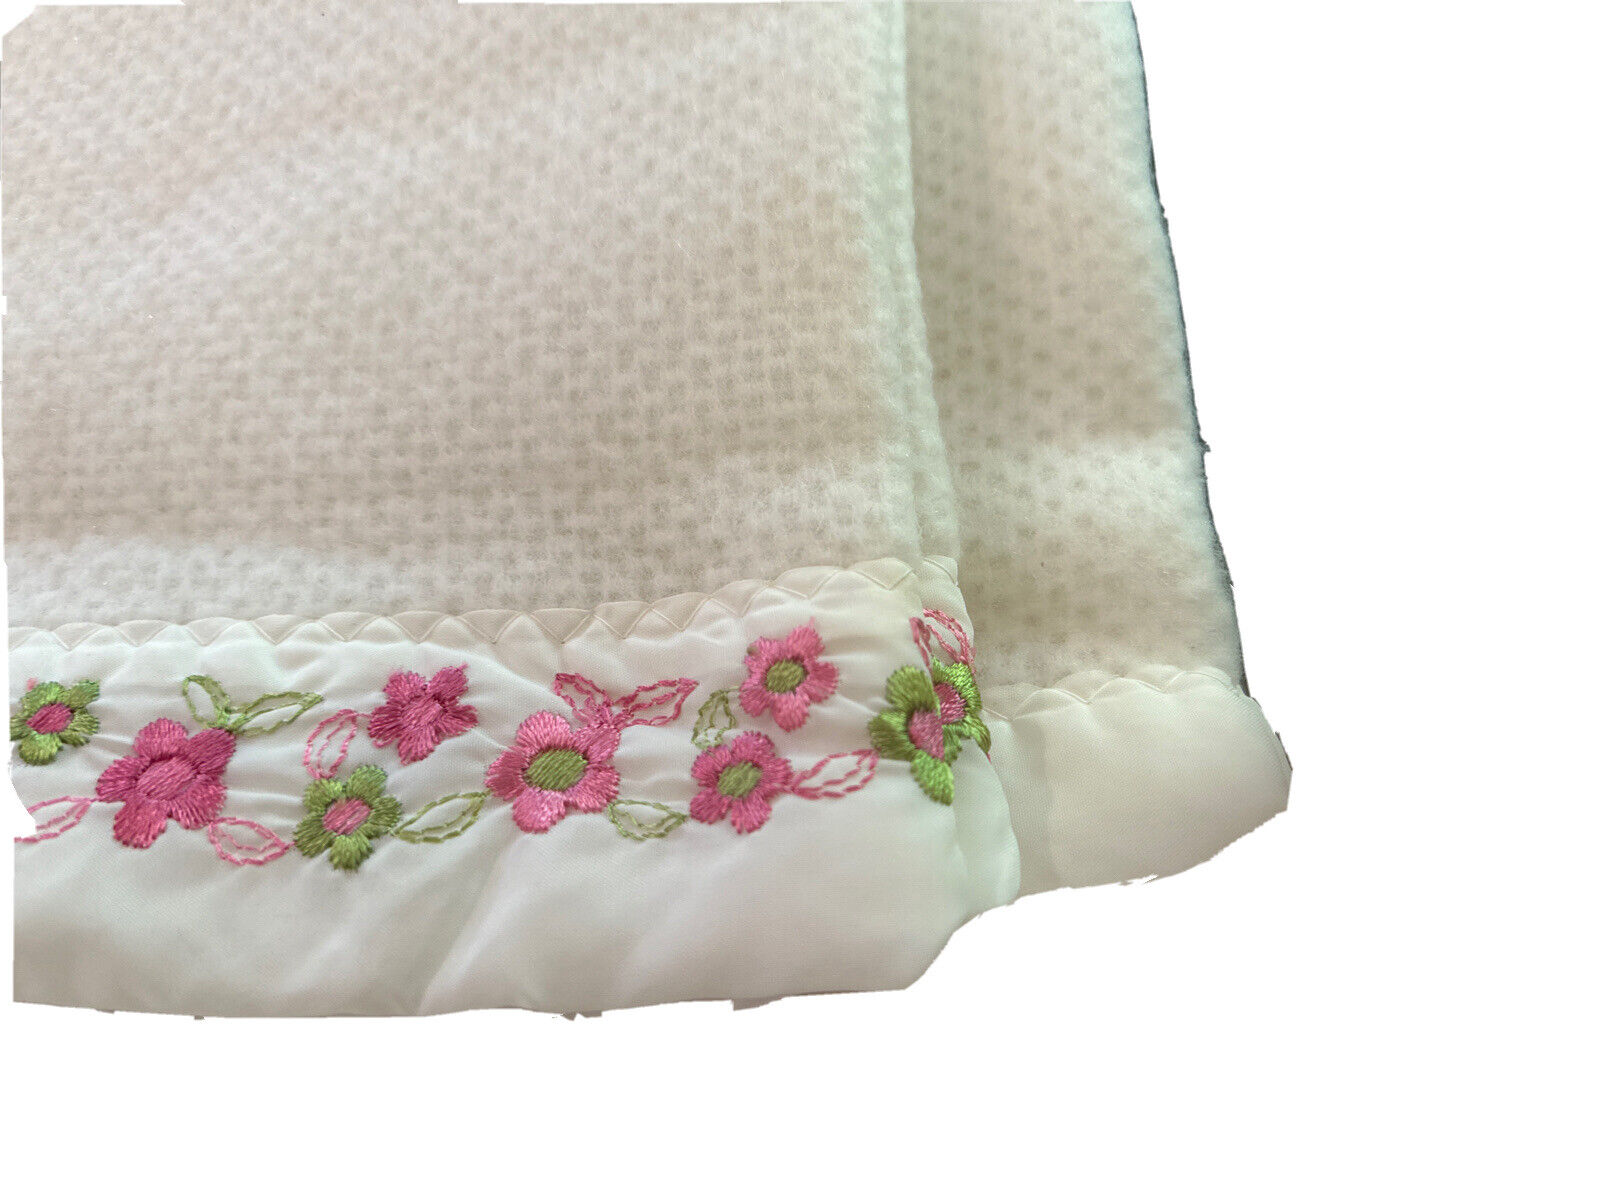 NEW- Vintage Dream Song Thermal Weave Blanket - Twin 66x90 - White Pink Flowers